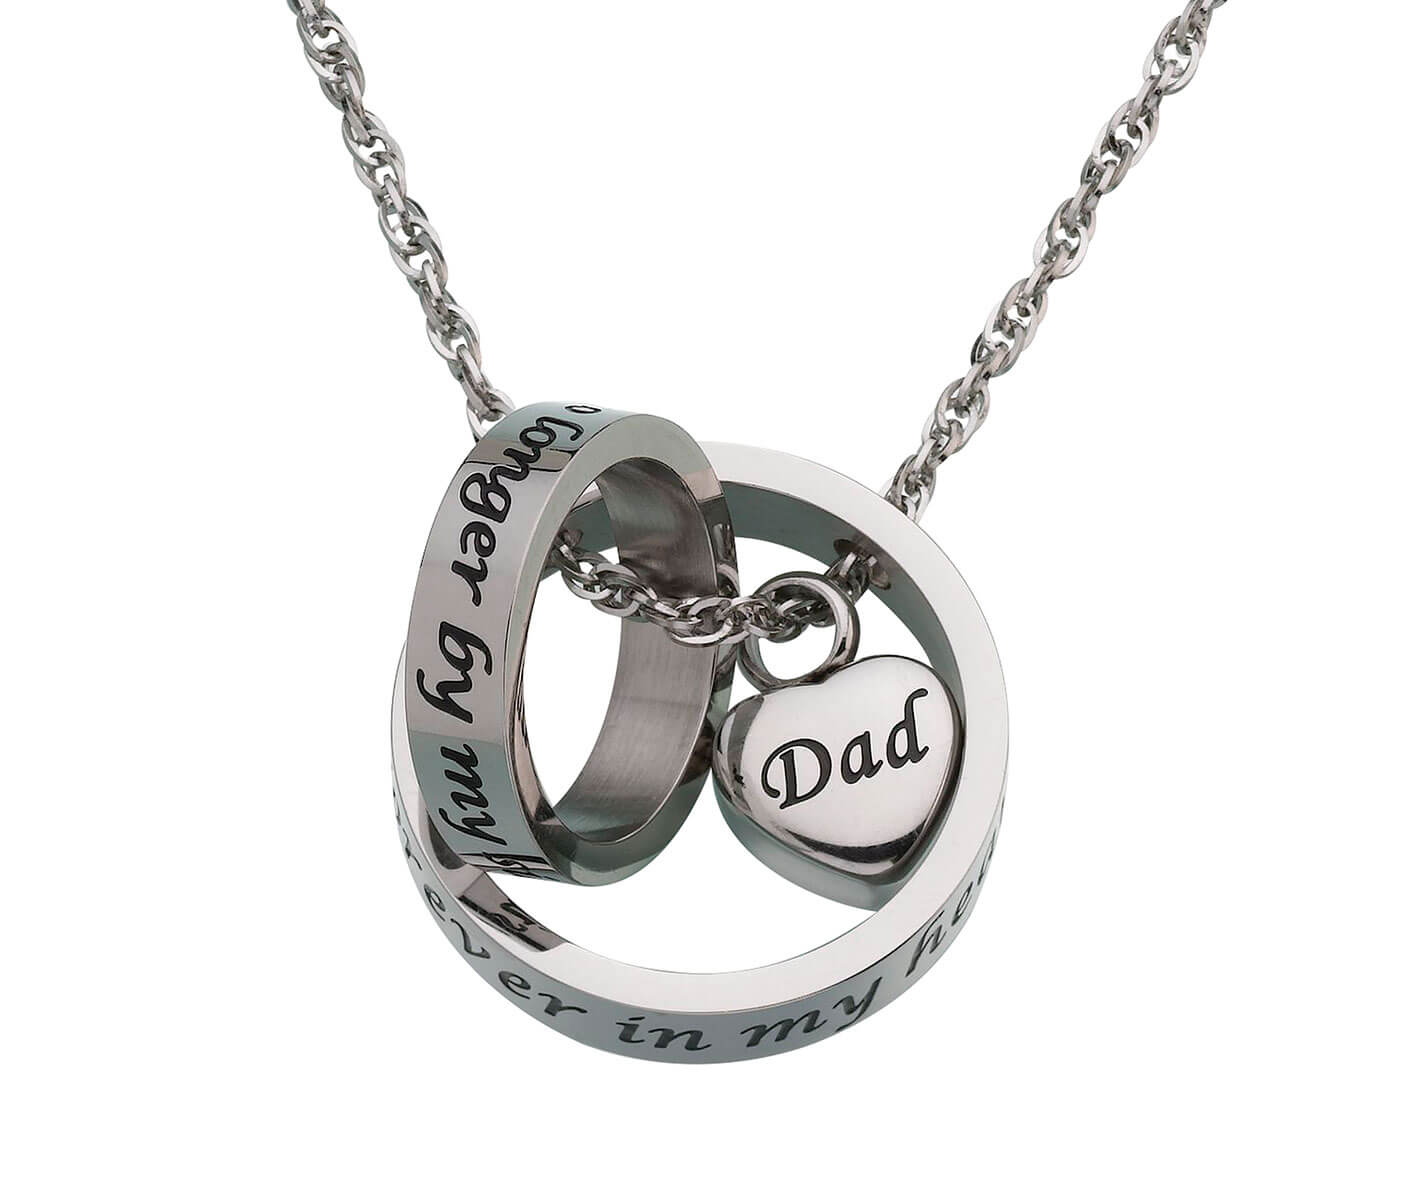 Angel Wings Dad - Stainless Steel Cremation Ashes Jewellery Necklace Pendant